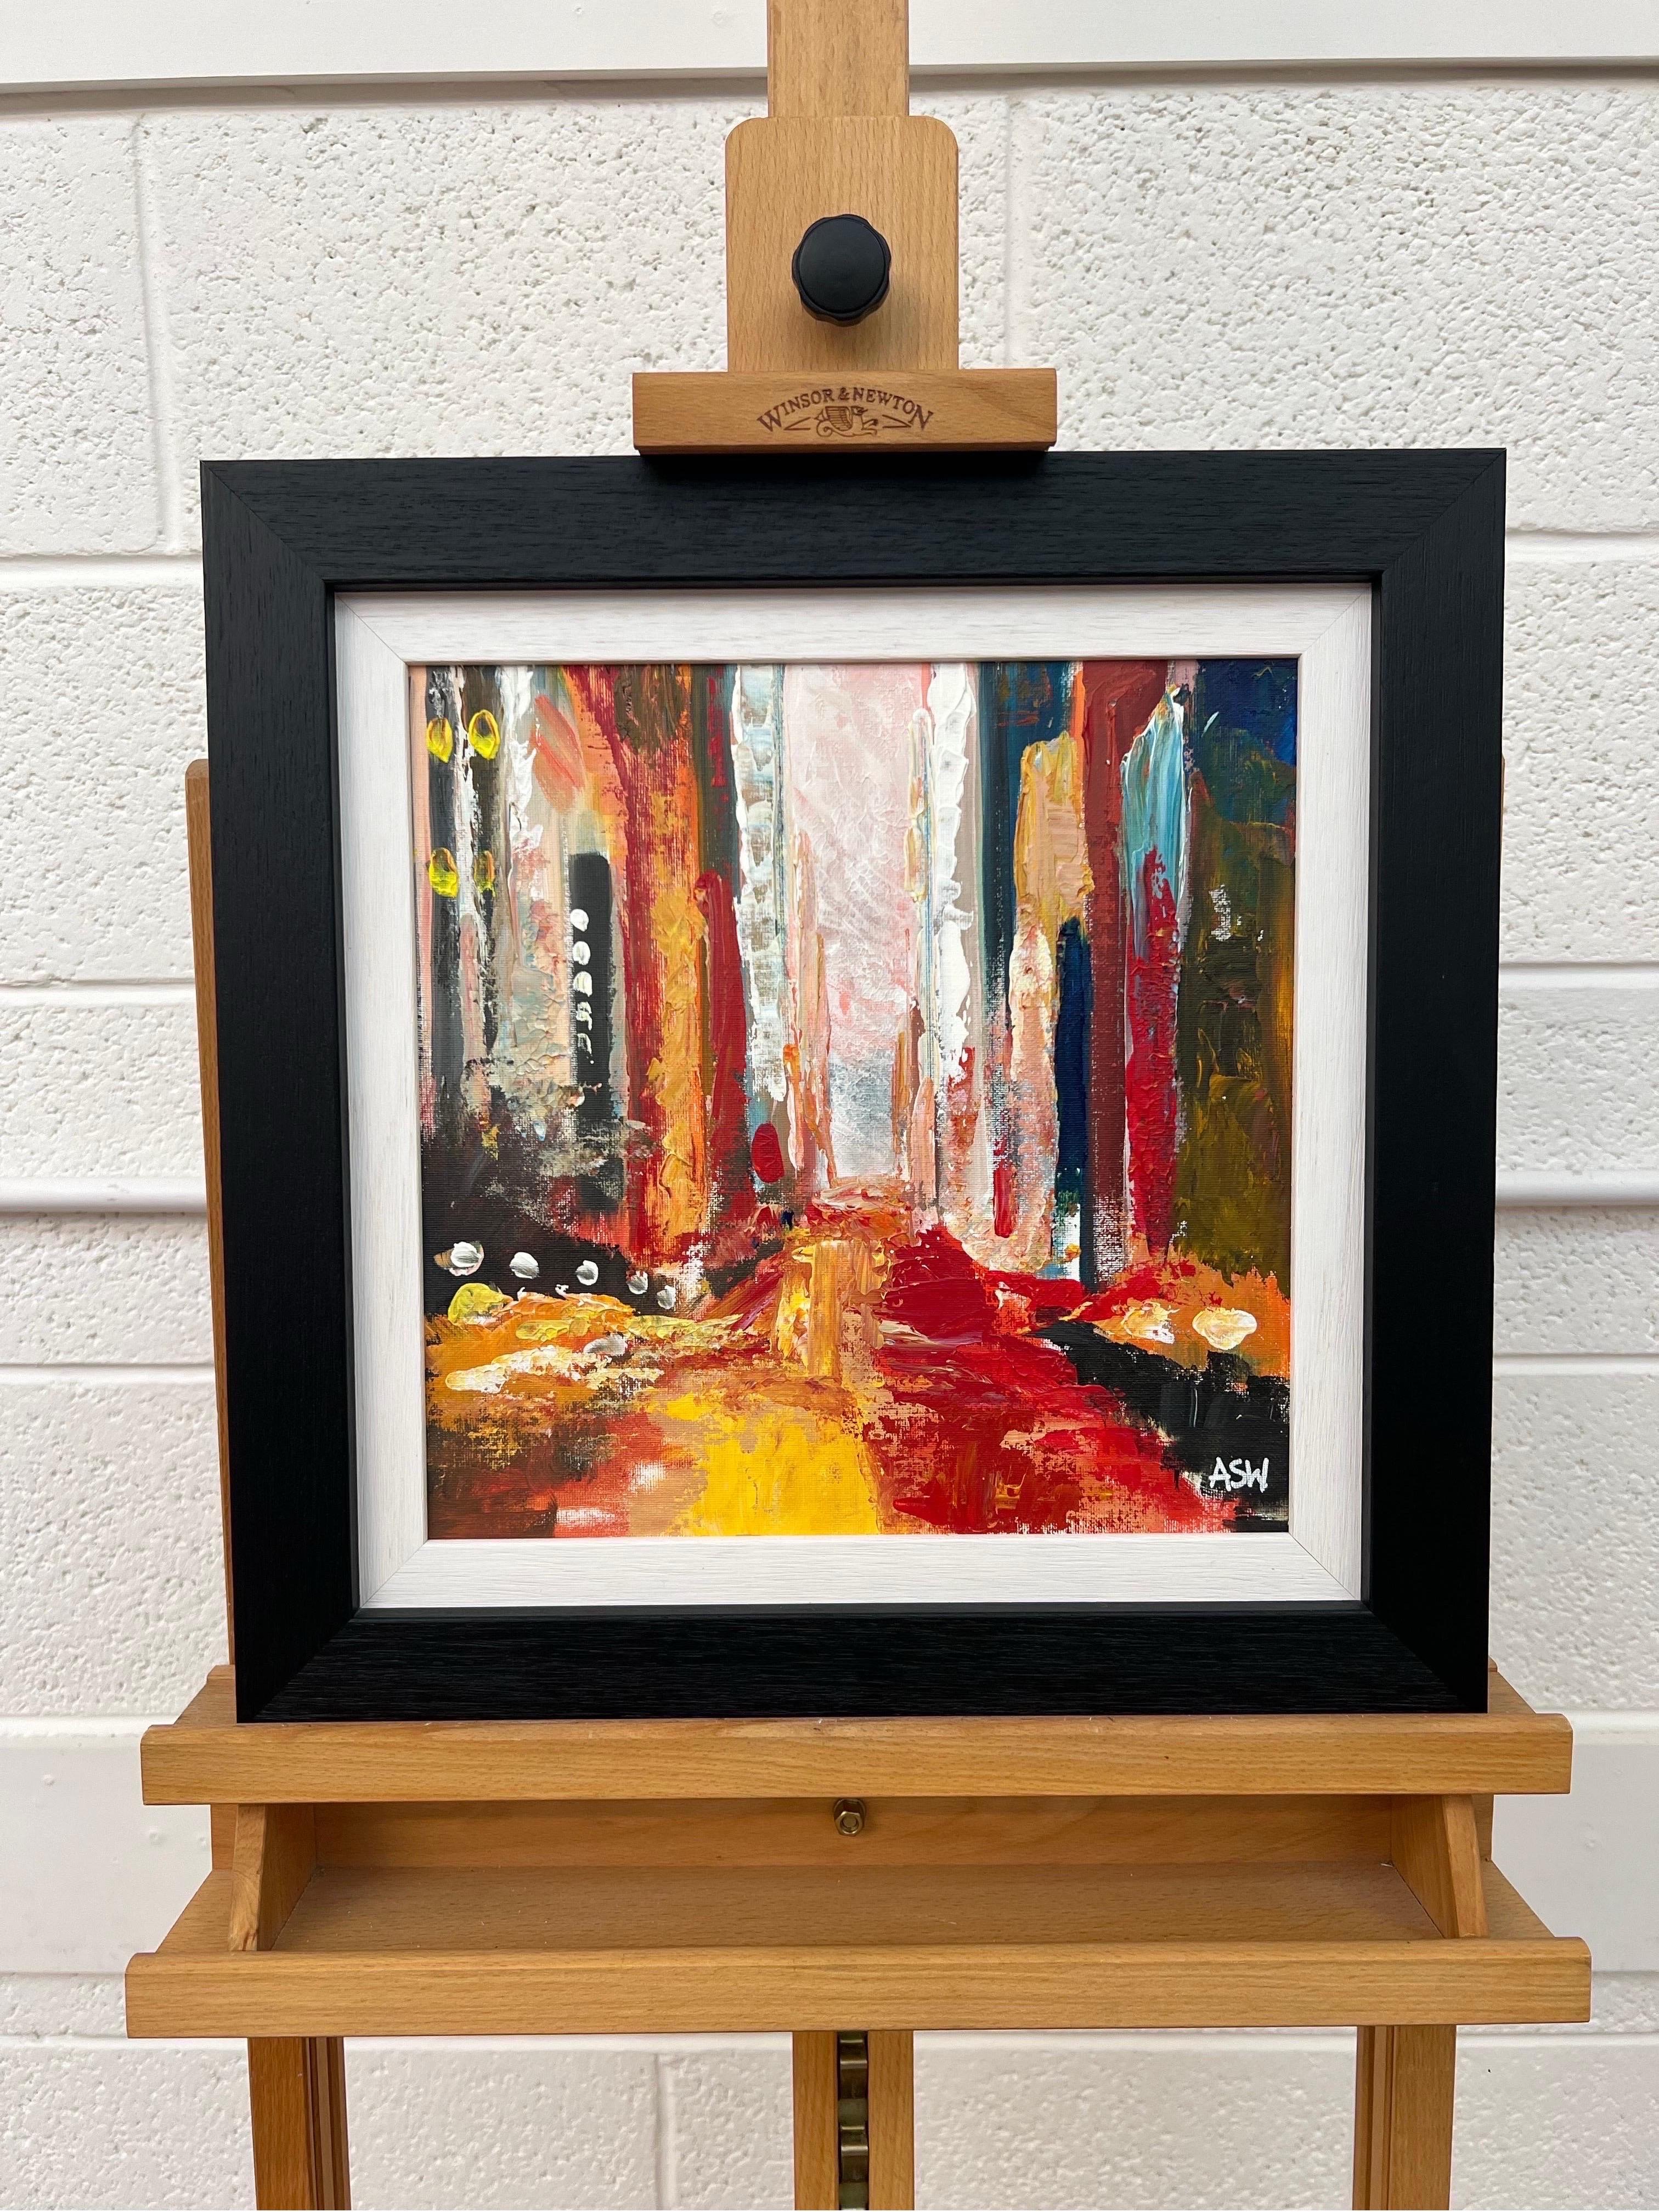 Colourful Red Impasto Abstract Interpretation of New York City by British Artist - Post-Impressionist Painting by Angela Wakefield